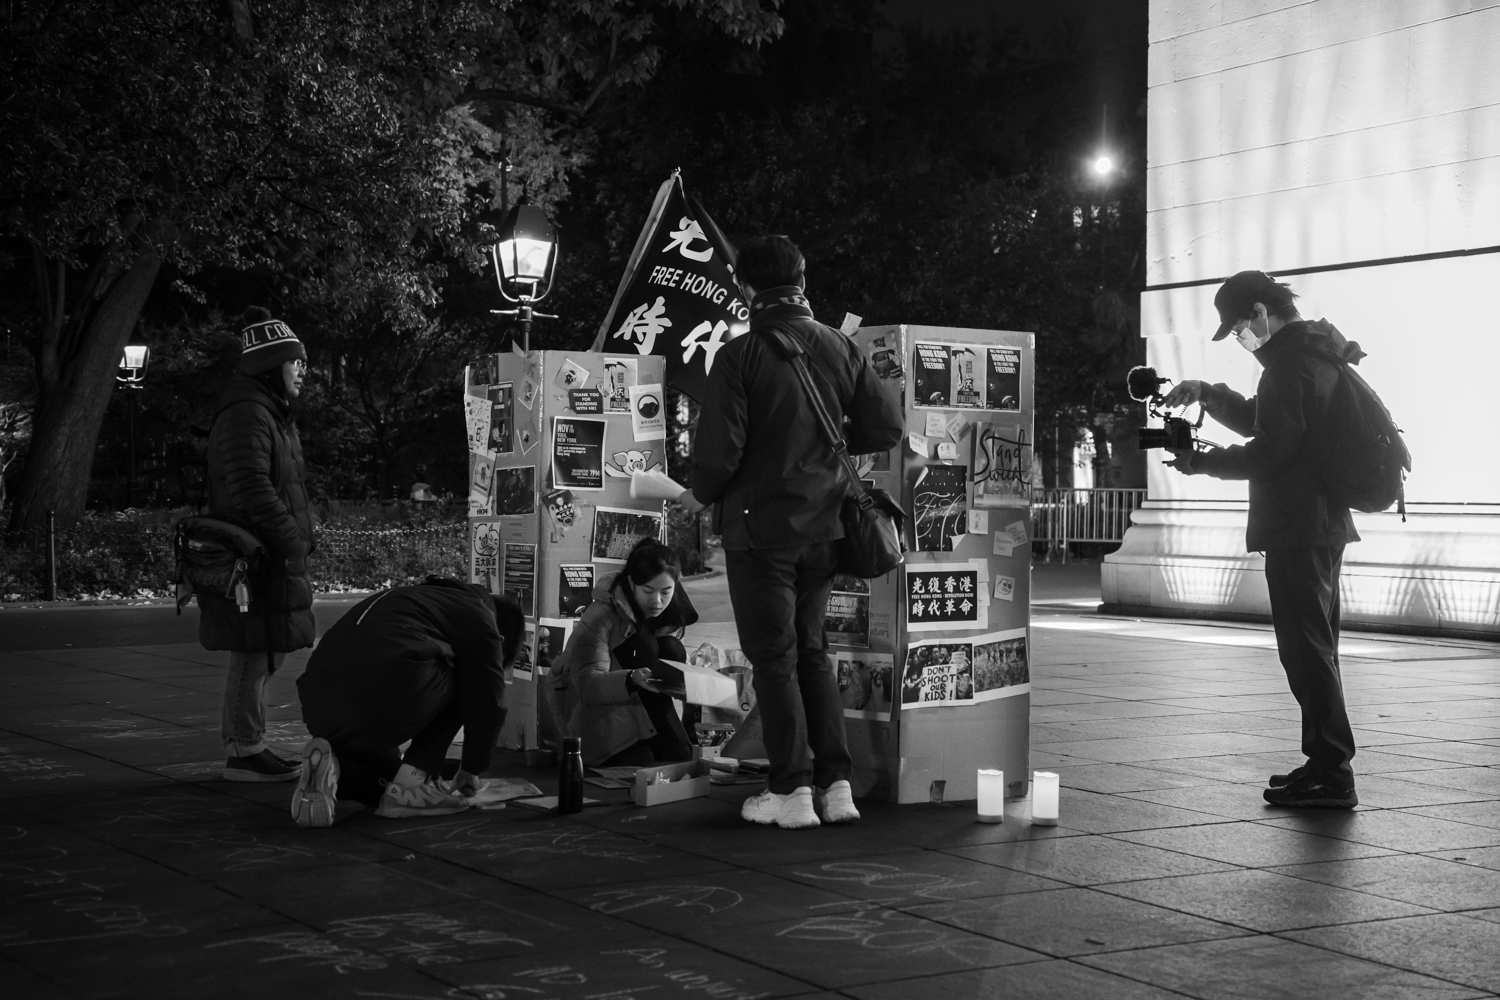 Four people gather around two columns made of cardboards that have several posters on them. One of the posters reads “FREE HONG KONG. REVOLUTION NOW” in all caps and traditional Chinese. There is another person holding a camera toward the group. Behind them is the Washington Square Arch. The photo is black and white.